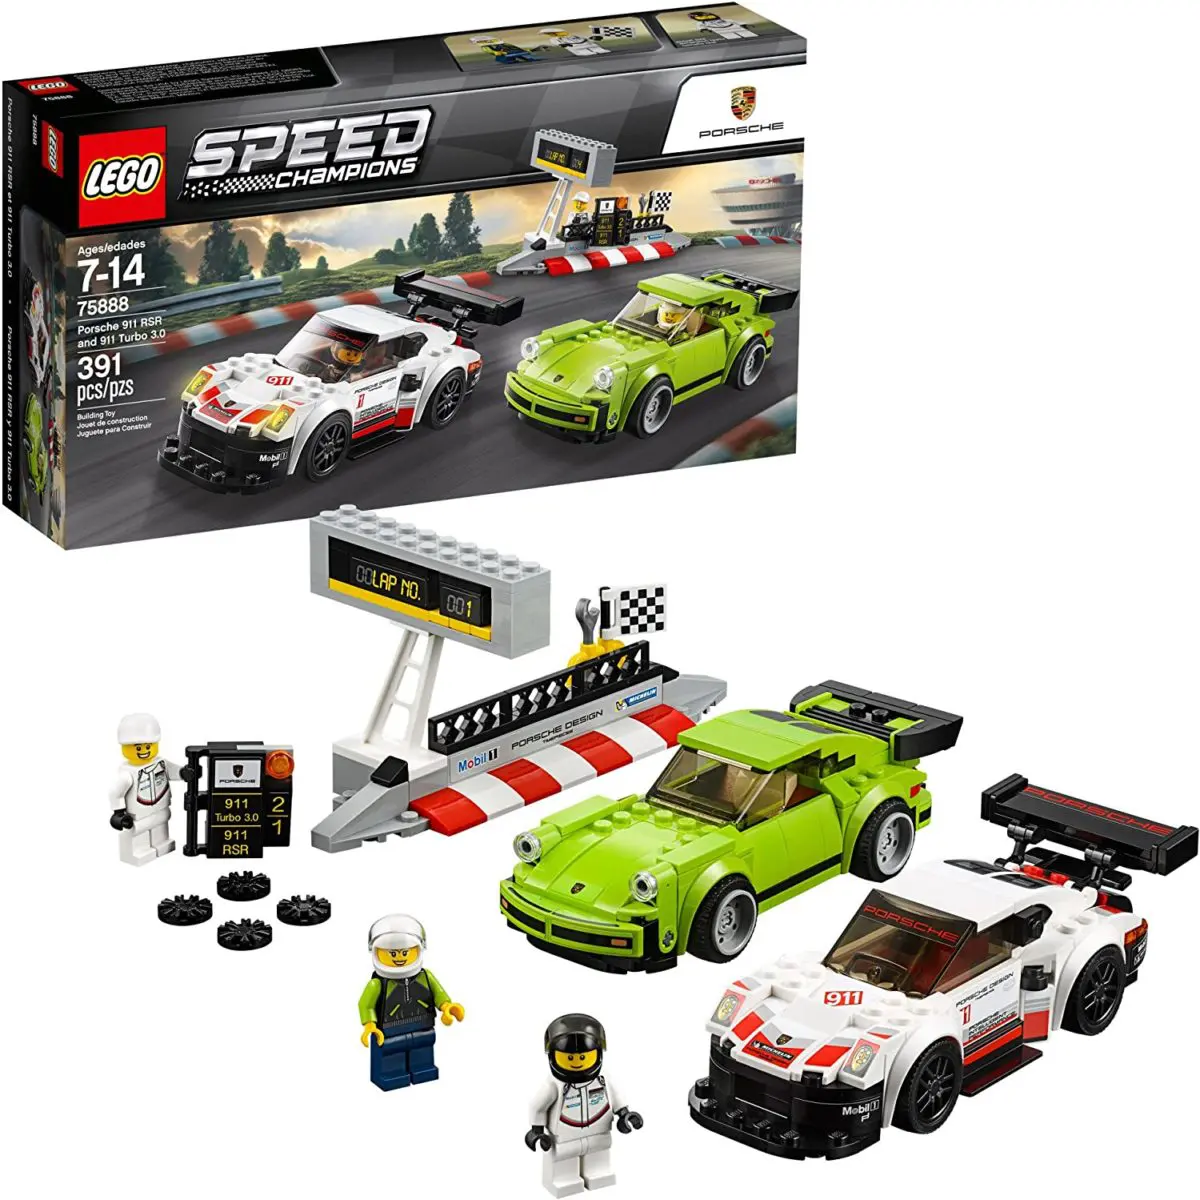 LEGO Speed Champions Porsche 911 RSR and 911 3.0 Building Kit - Top Toys and Gifts for Ten Year Old Boys 1